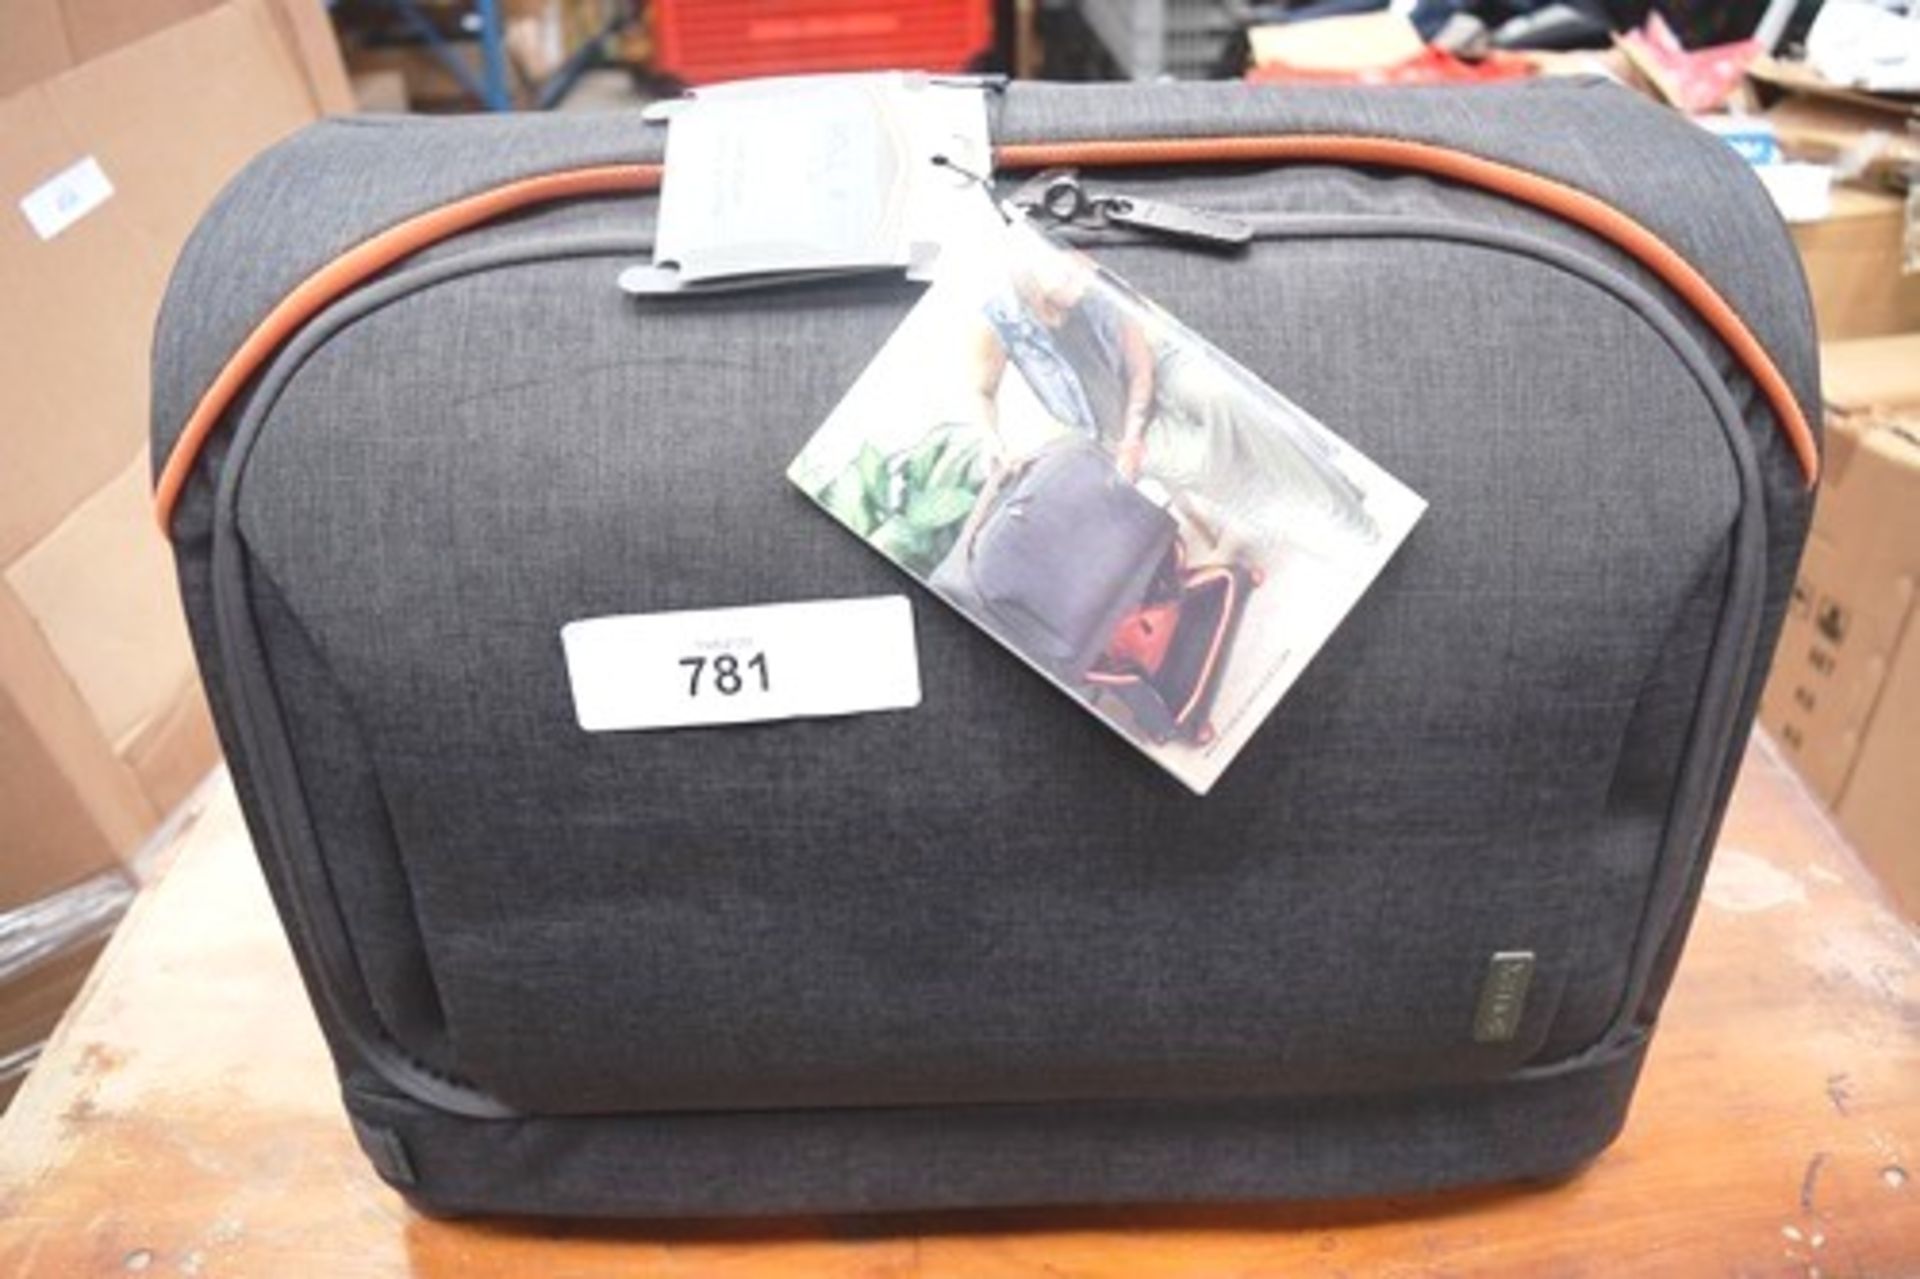 1 x Fugu Rollux expandable suitcase - New with tags (GS16)